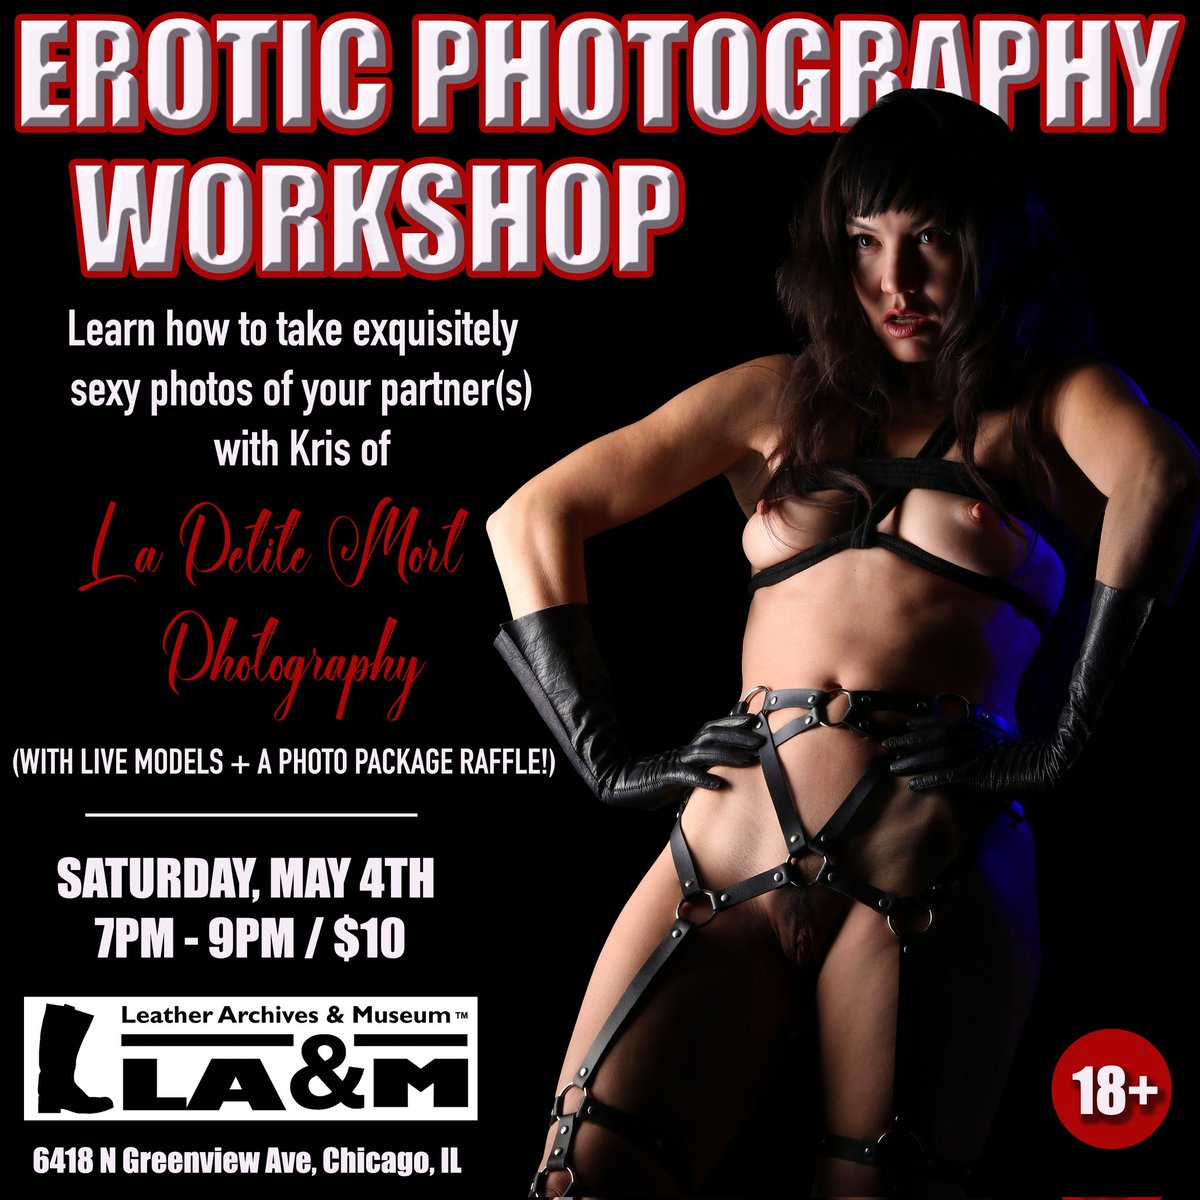 Feel and look your sexiest best on camera. Kris will show you the best poses, and the hottest lighting, to up your game. The models are exquisite! $10, register online at leatherarchives.libcal.com/event/12340828